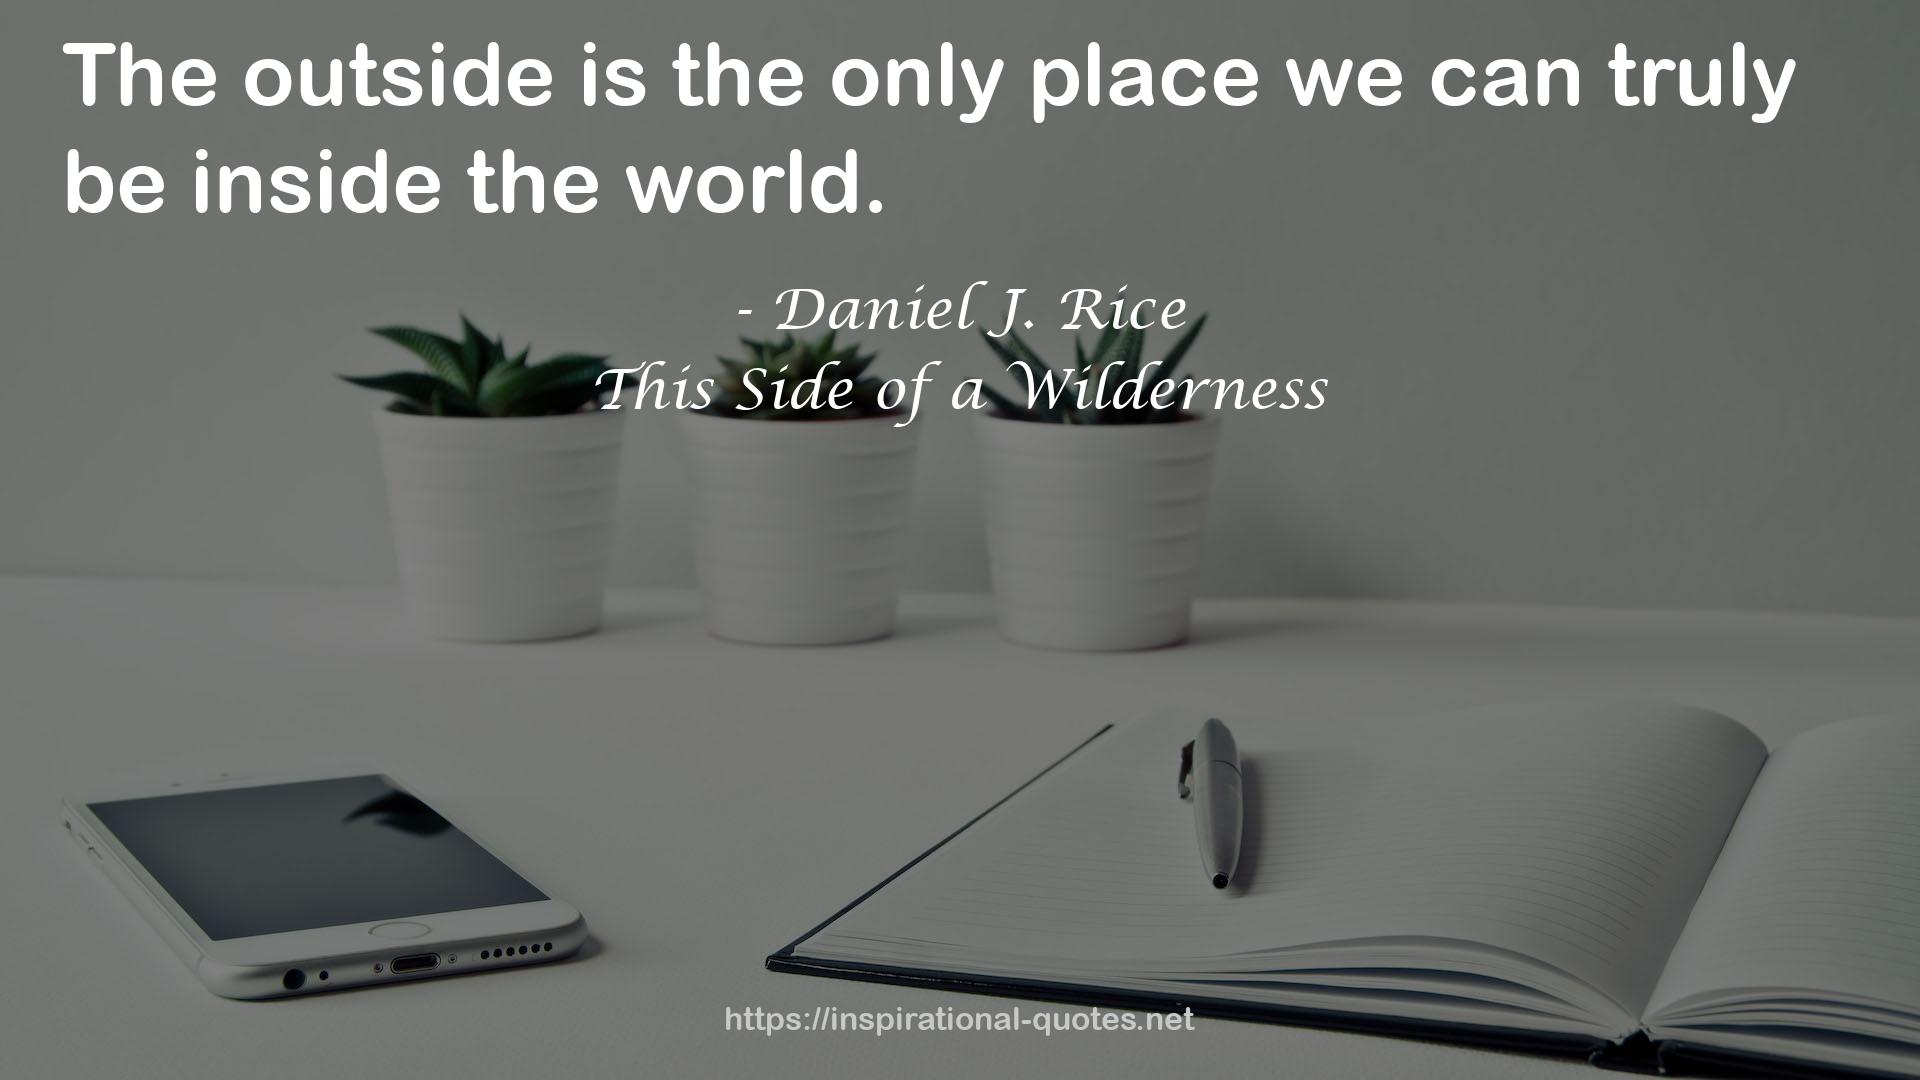 This Side of a Wilderness QUOTES